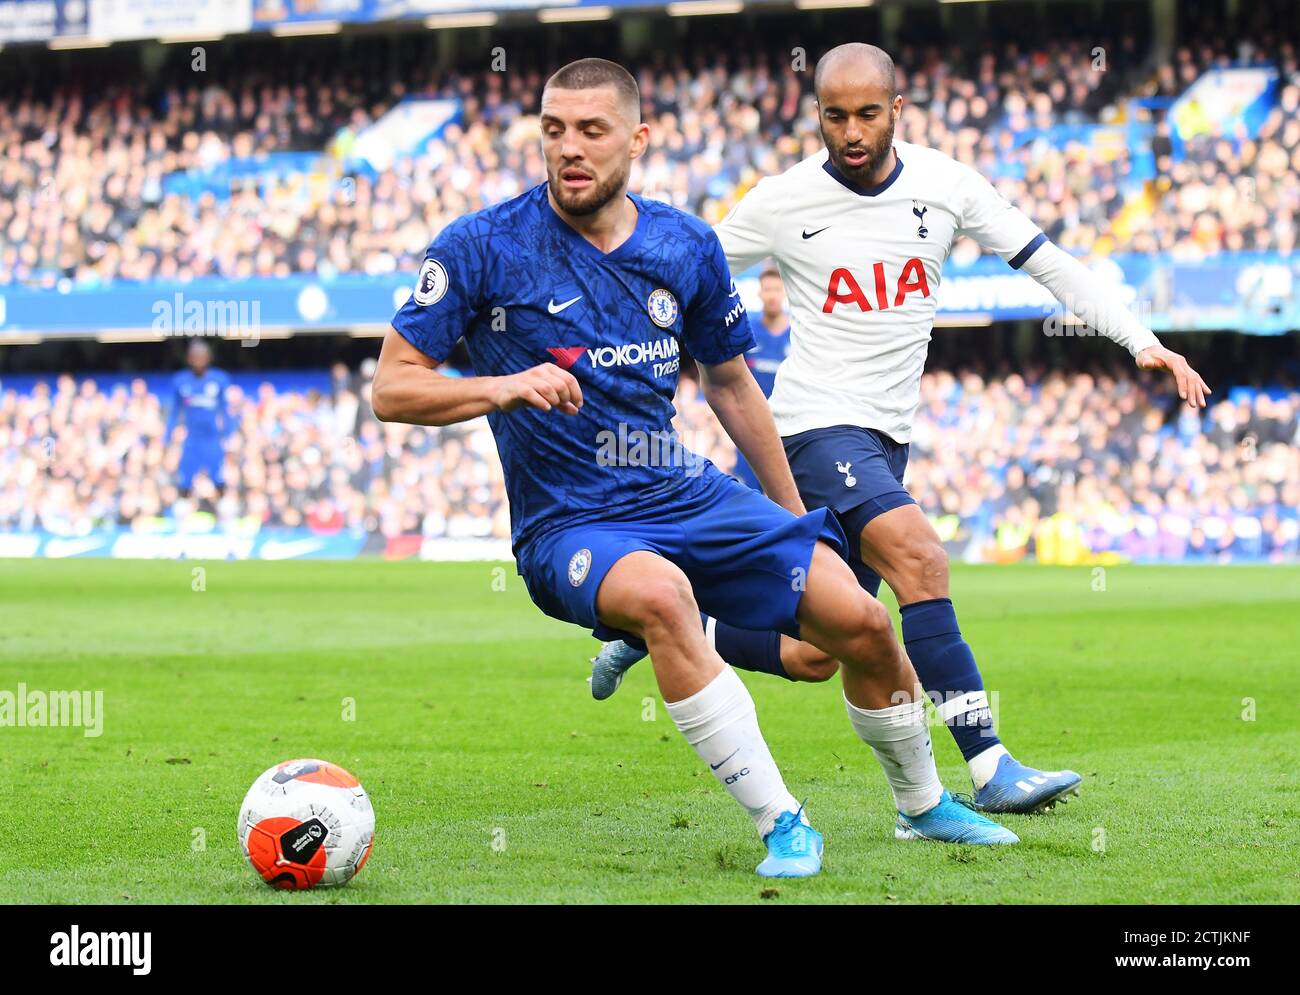 LONDON, ENGLAND - FEBRUARY 22, 2020: Mateo Kovacic of Chelsea and Lucas Moura of Tottenham pictured during the 2019/20 Premier League game between Chelsea FC and Tottenham Hotspur FC at Stamford Bridge. Stock Photo